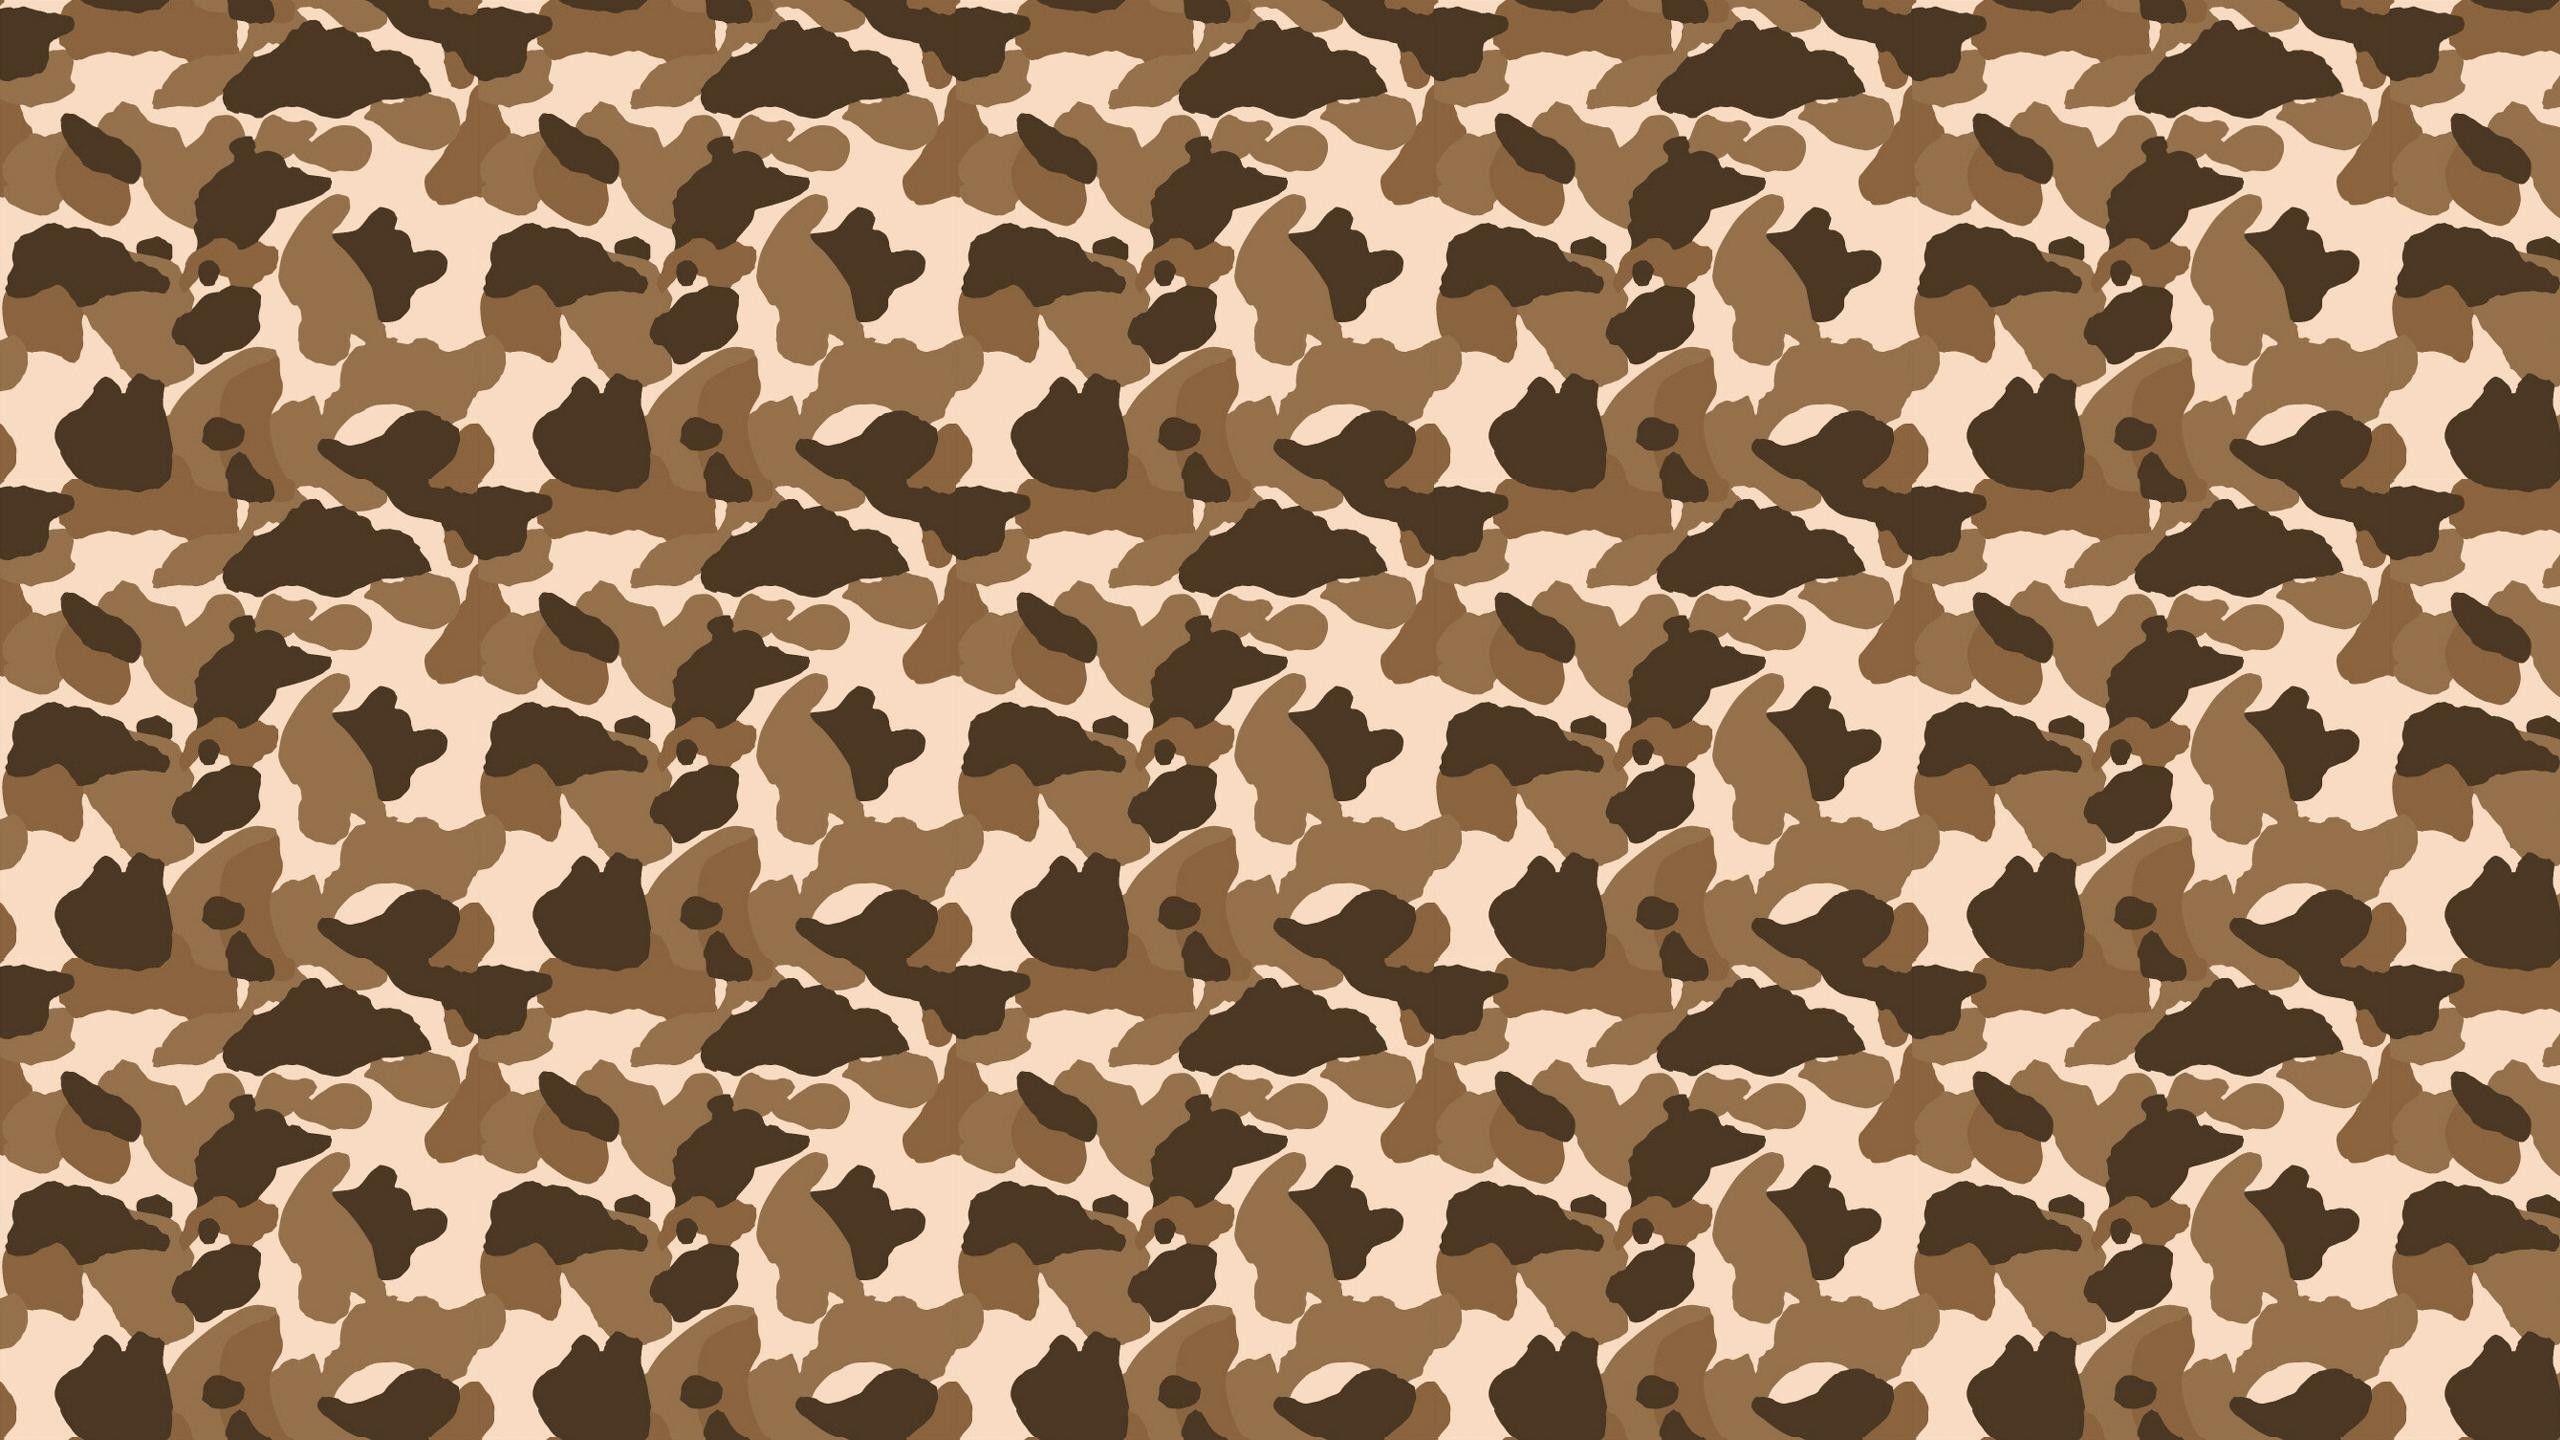 Free download BAPE Wallpaper with Shark Face on Camo Background Wallpapers  Clan 1183x2560 for your Desktop Mobile  Tablet  Explore 30 Purple BAPE  Wallpapers  Bape Wallpaper HD Bape Camo Wallpaper